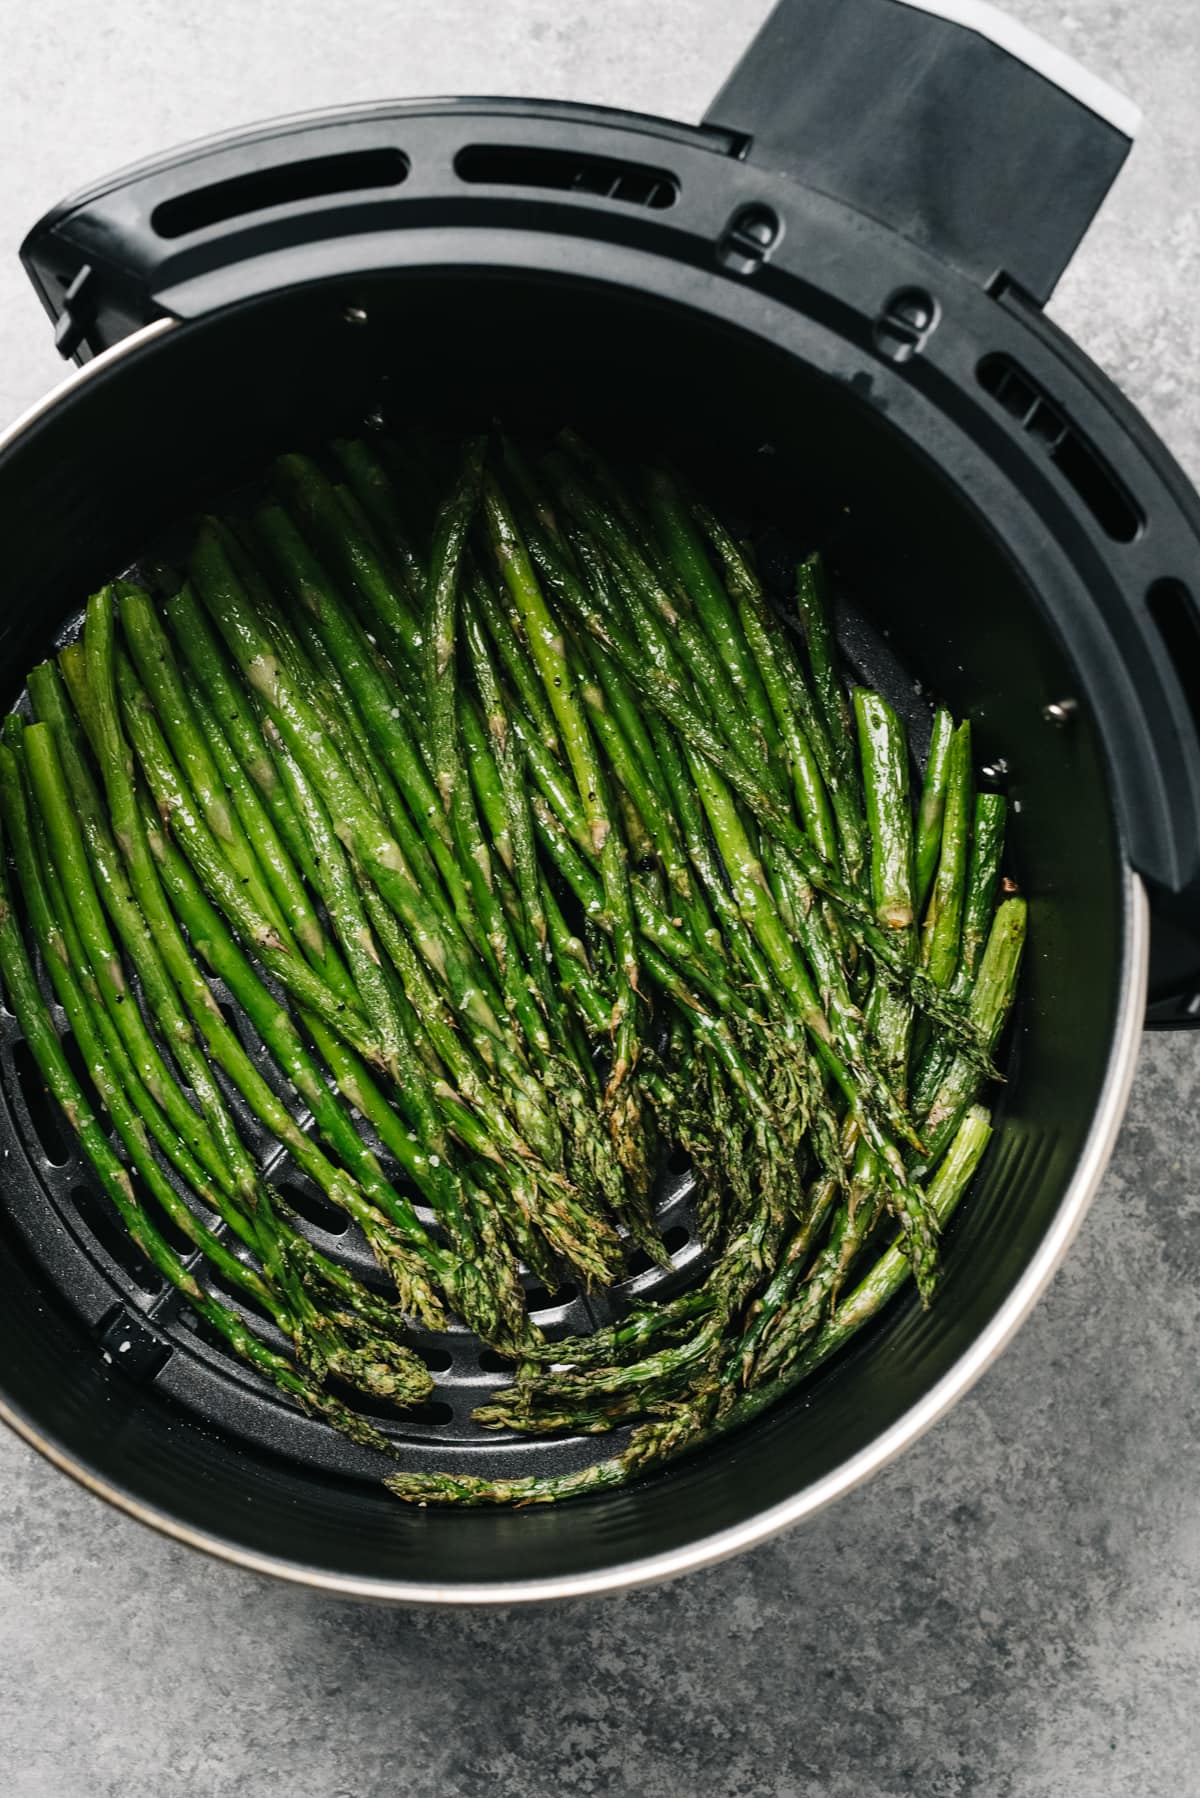 Cooked asparagus spears in the basket of an air fryer.